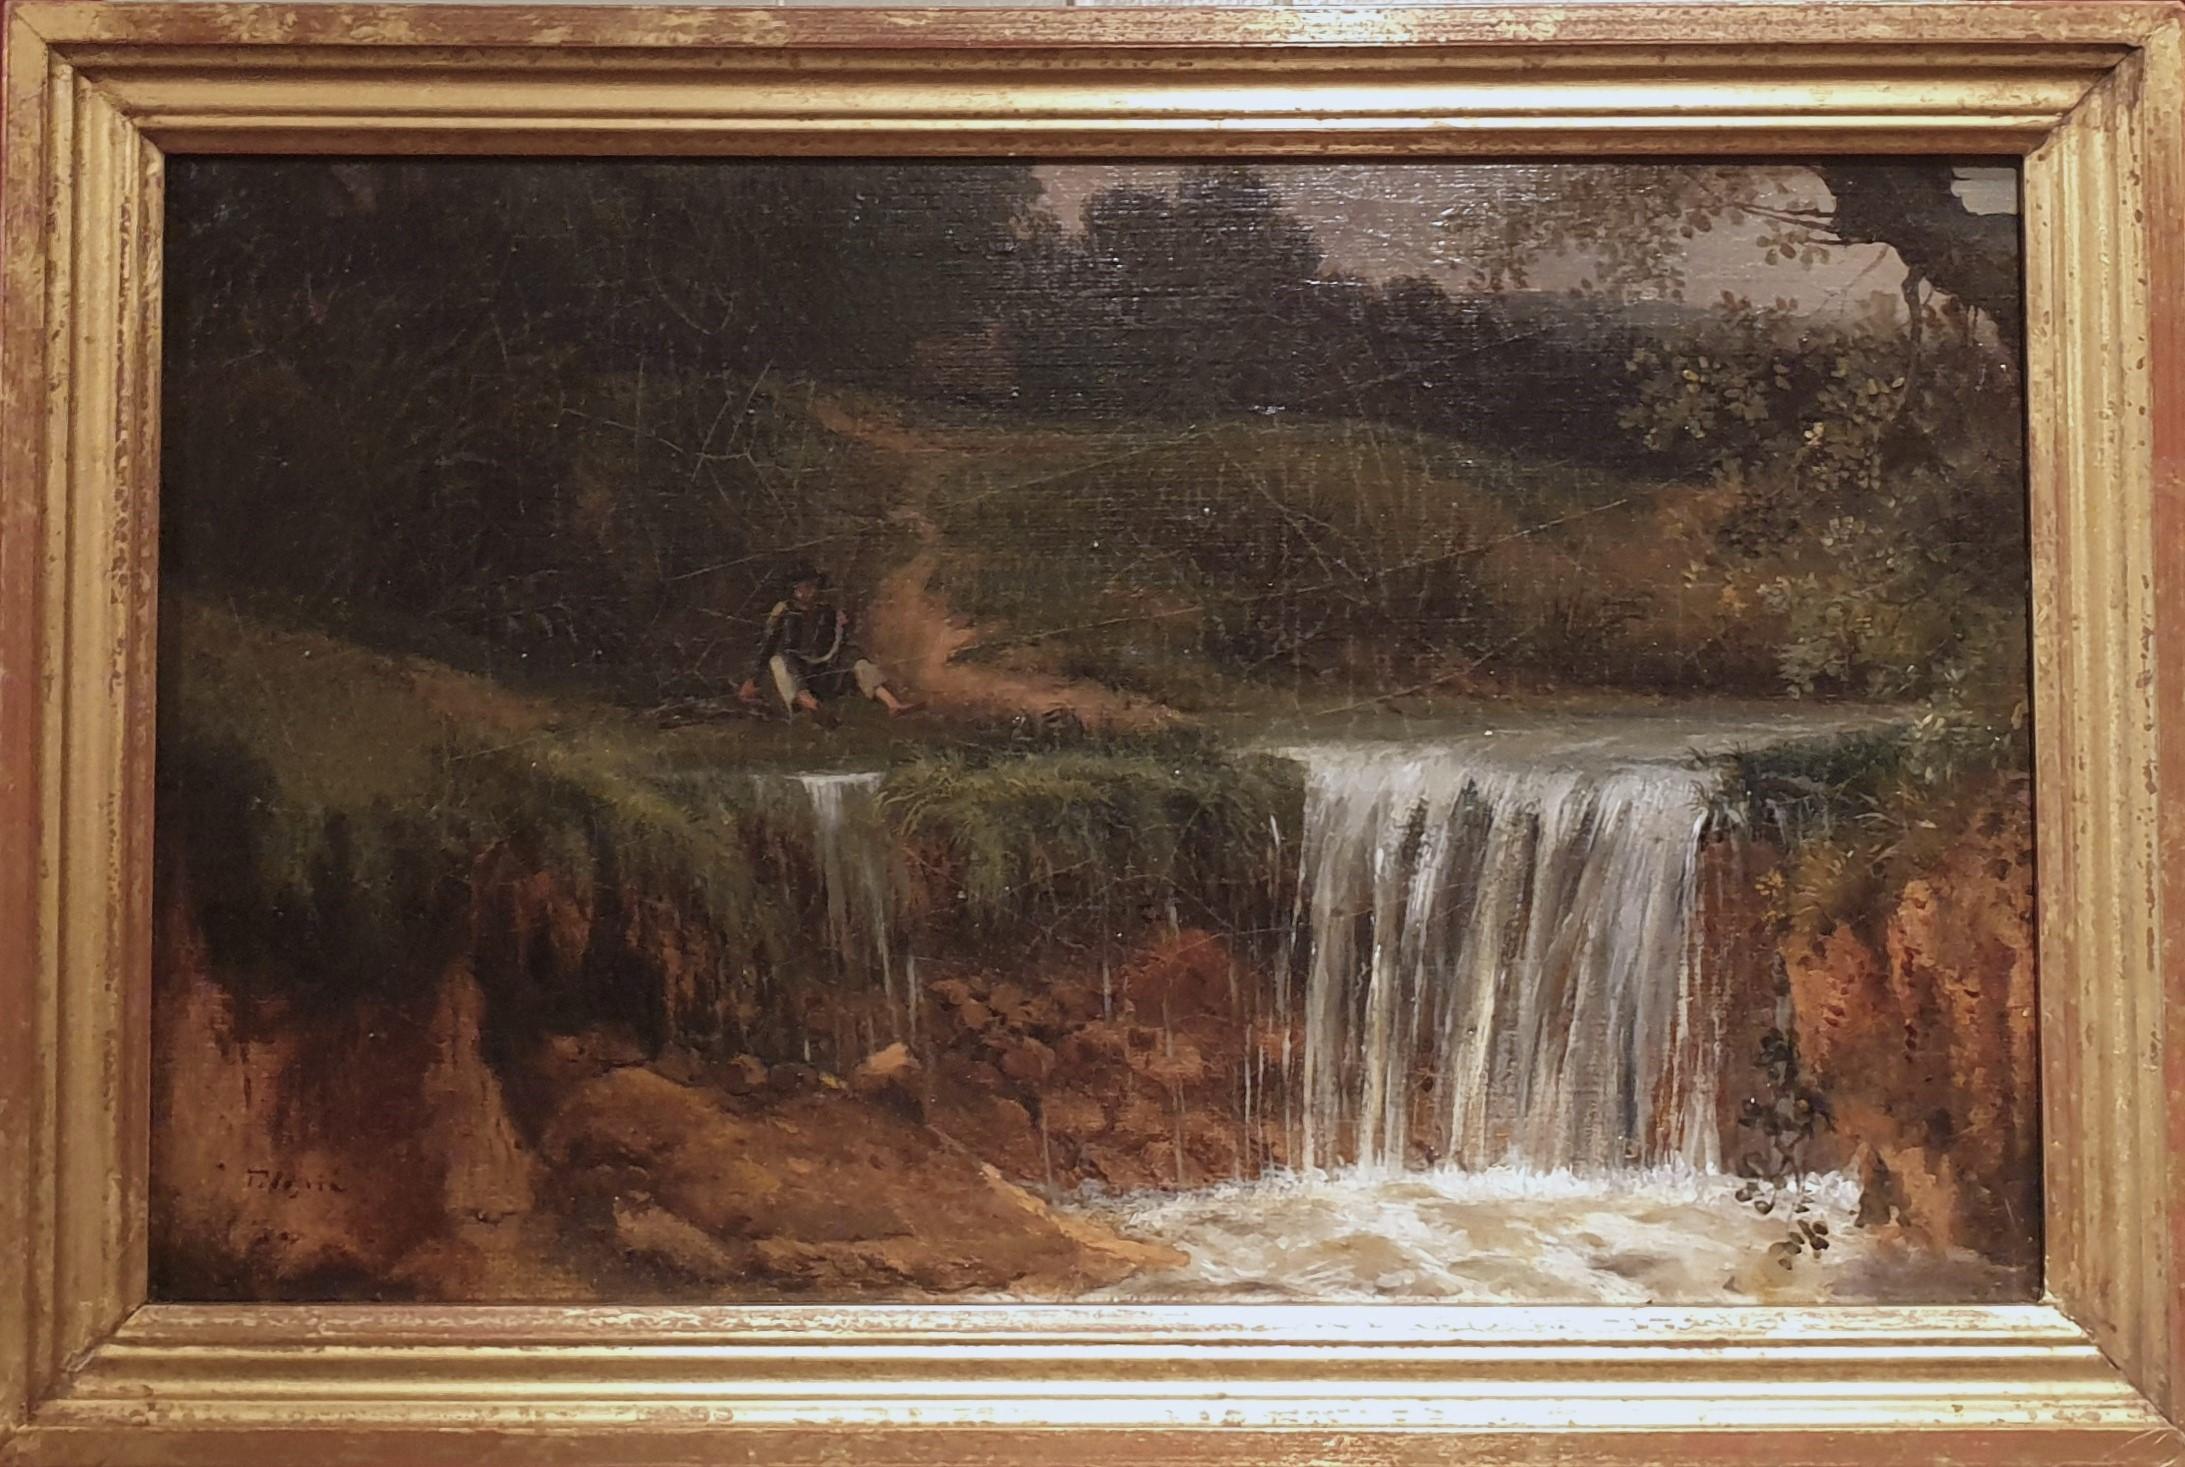 French School first half nineteenth Oil on panel 22 x 35 cm (26 x 39 cm with the frame) Trace signature lower left Nice 19th century frame in gilded wood

This small painting represents a bucolic landscape with a small shepherd sitting with his fish